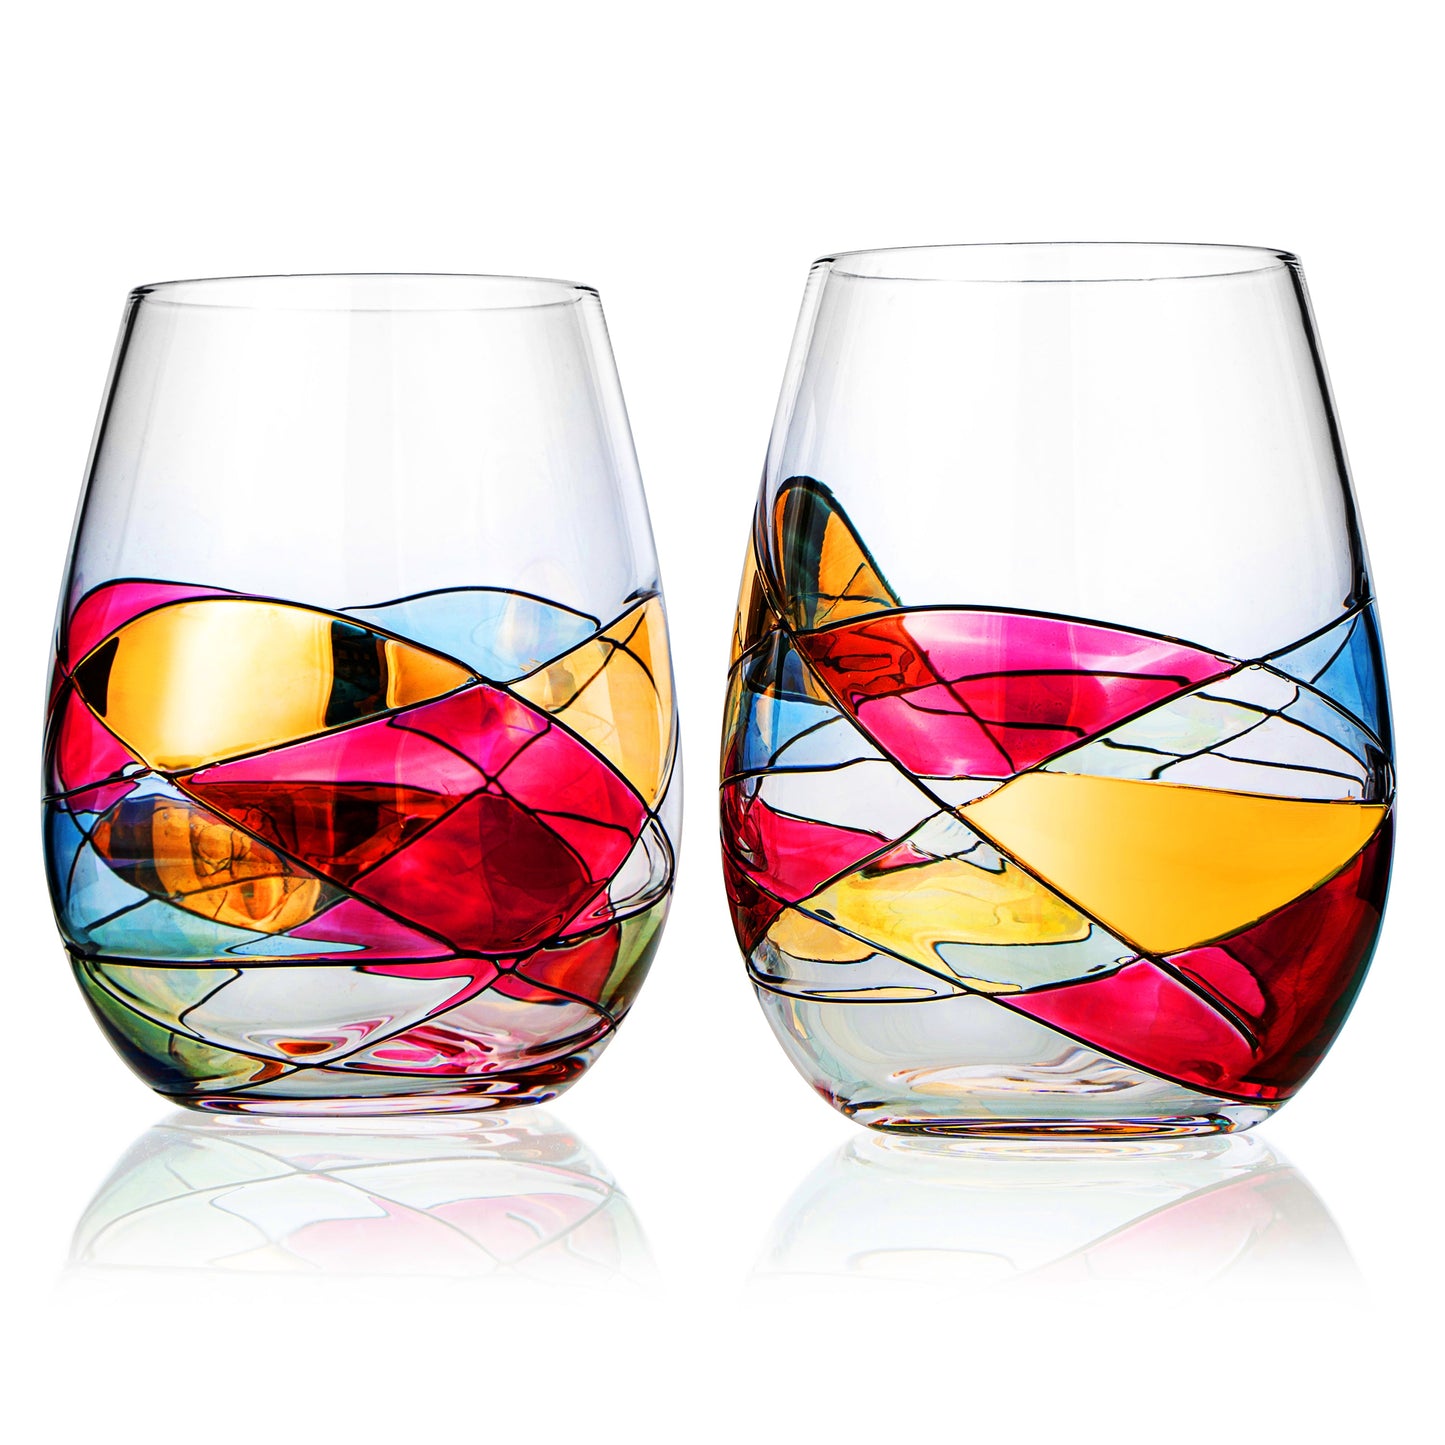 The Wine Savant - Artisanal Hand-Painted Stemless - Renaissance Stained Glass Window Design - Set of 2